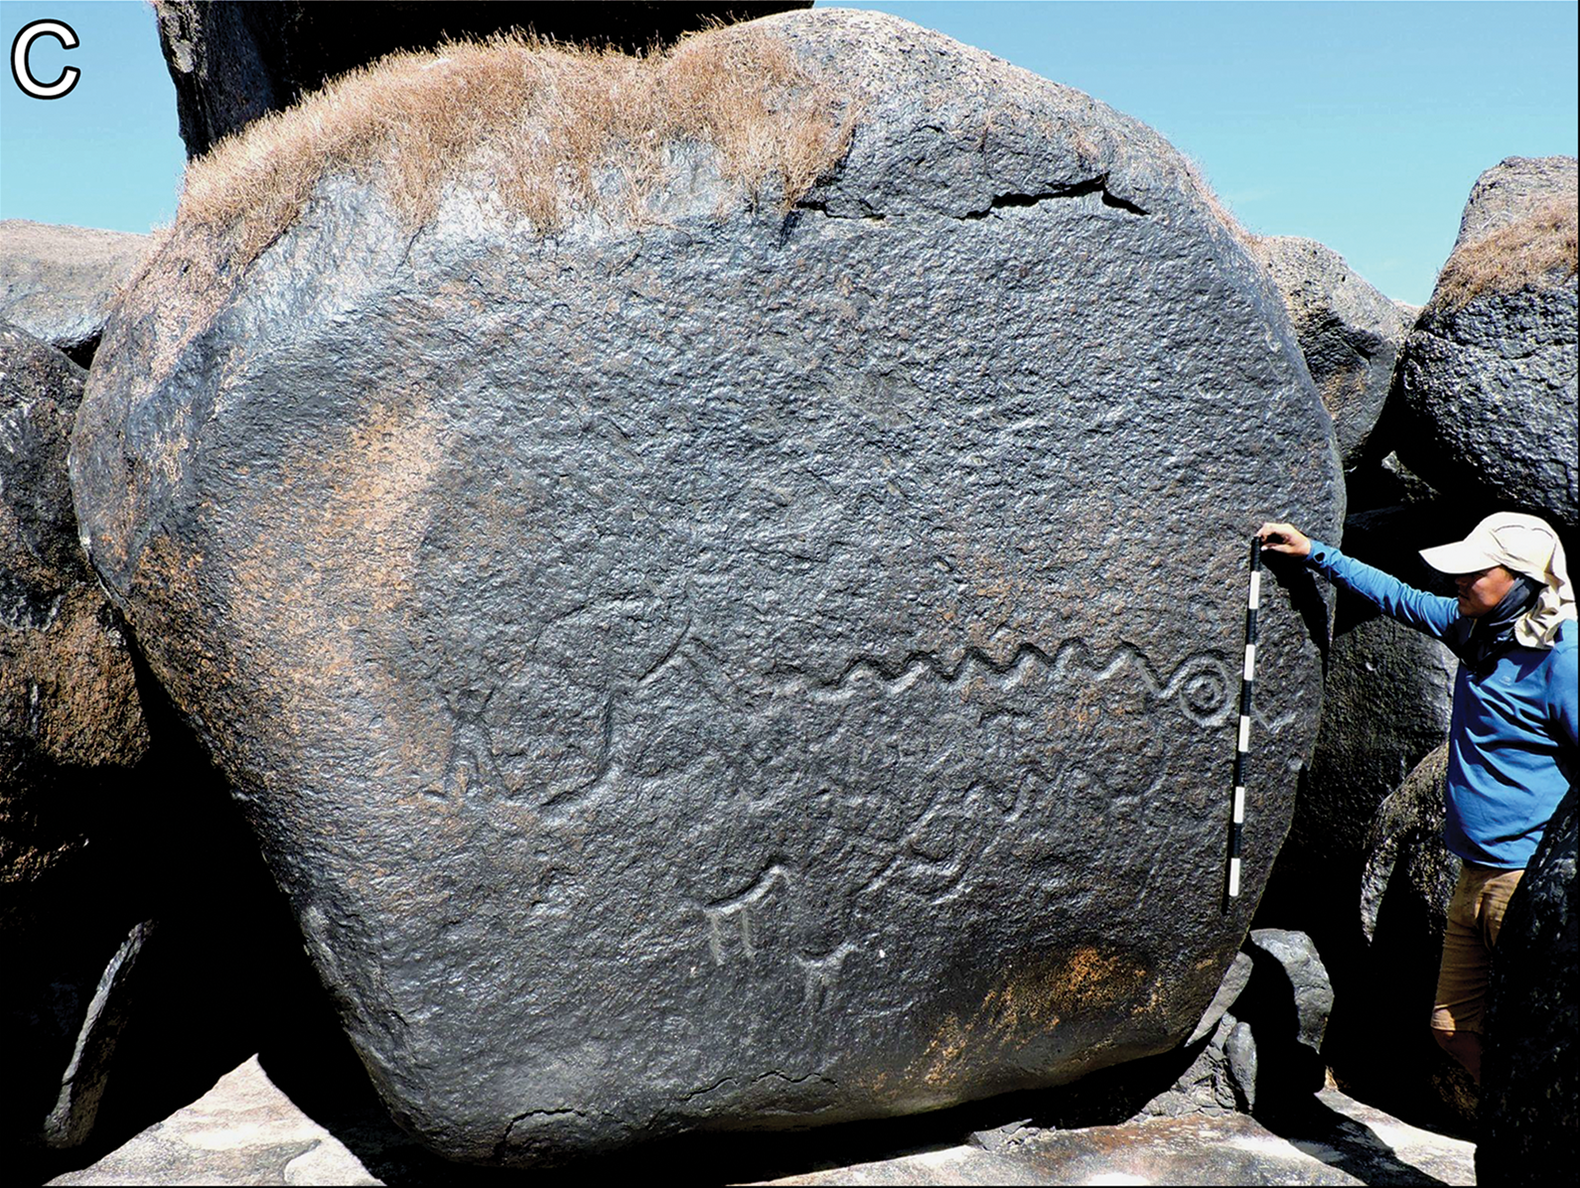 According to a new study, giant rock engravings along the Upper and Middle Orinoco River in South America may have served as territorial markers. Archaeologists from Bournemouth University (UK), University College London (UK), and Universidad de Los Andes (Colombia) have mapped 14 sites, with the largest engraving measuring 40 meters in length.